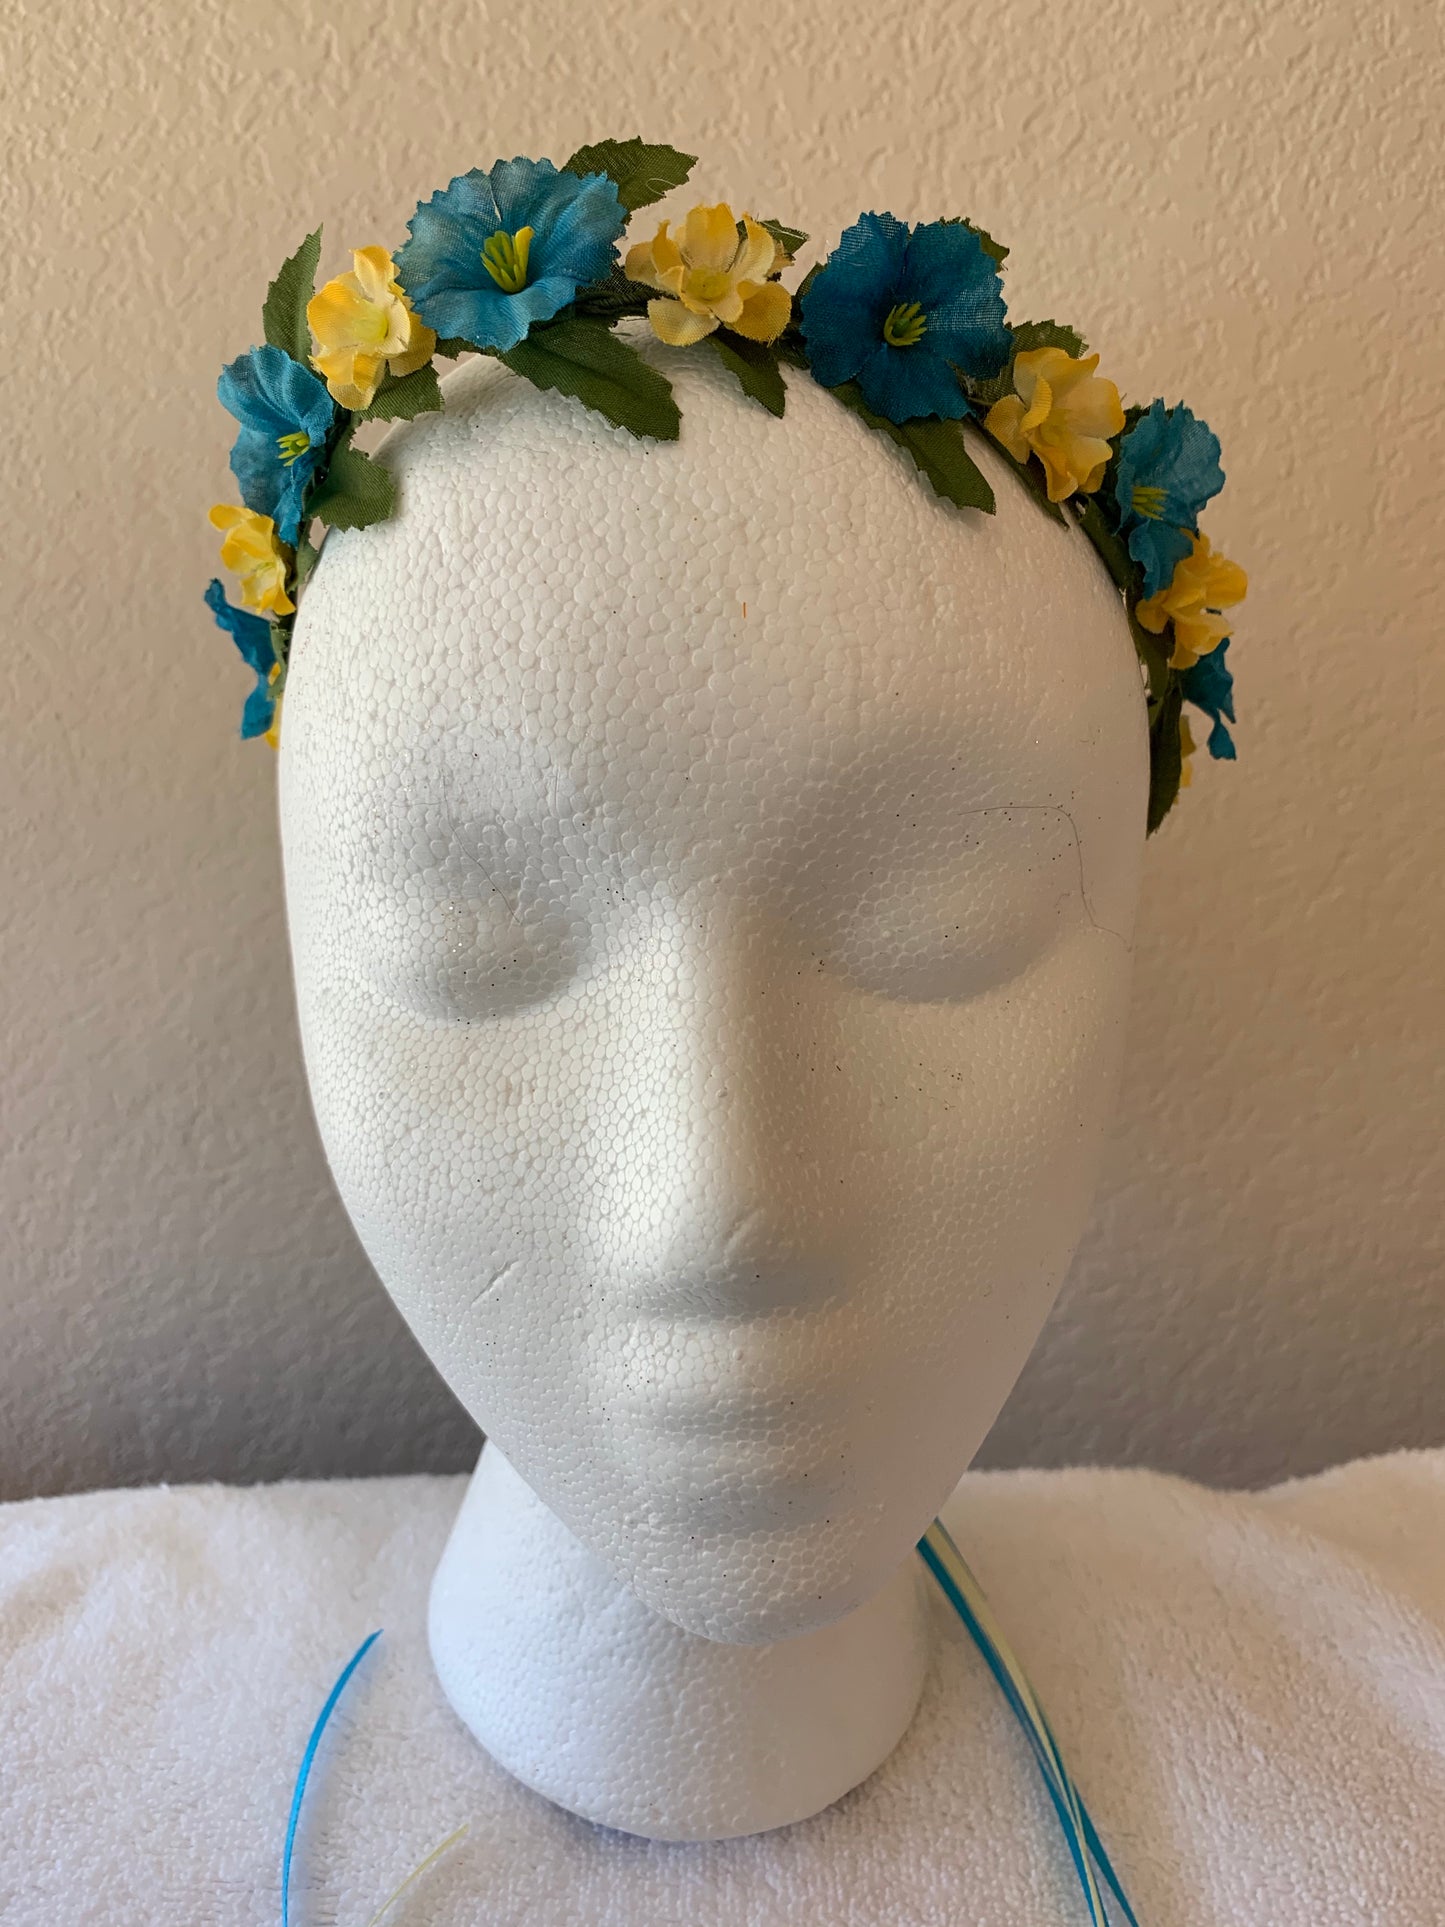 Extra Small Wreath - Teal and Yellow Flowers